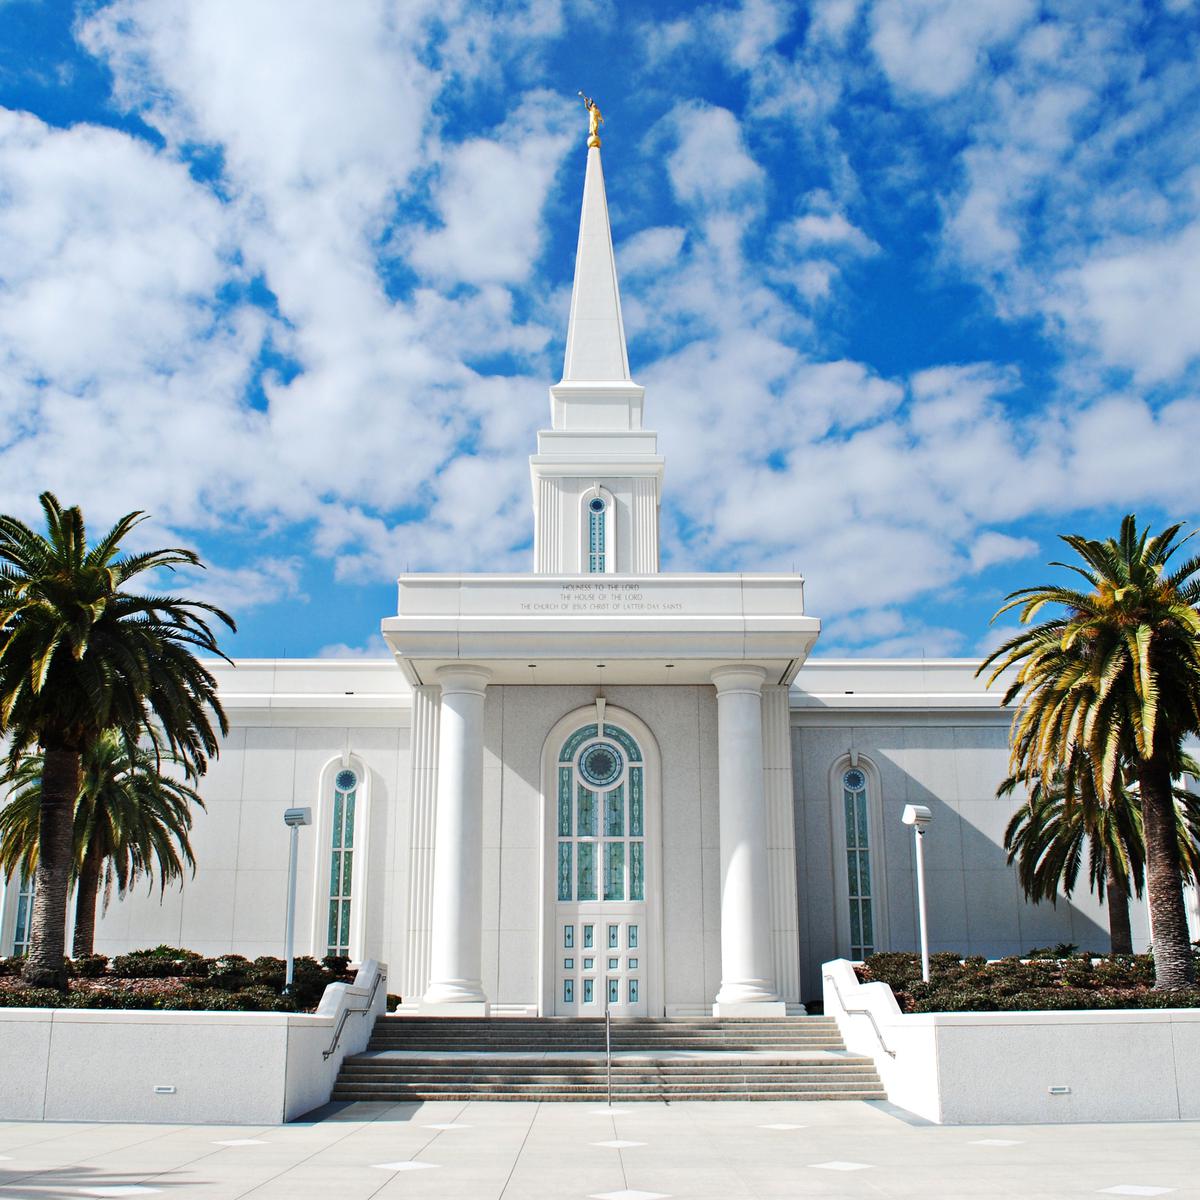 The exterior of the Orlando Florida Temple, a white building with arched windows around it and a tower with a square base on top. 